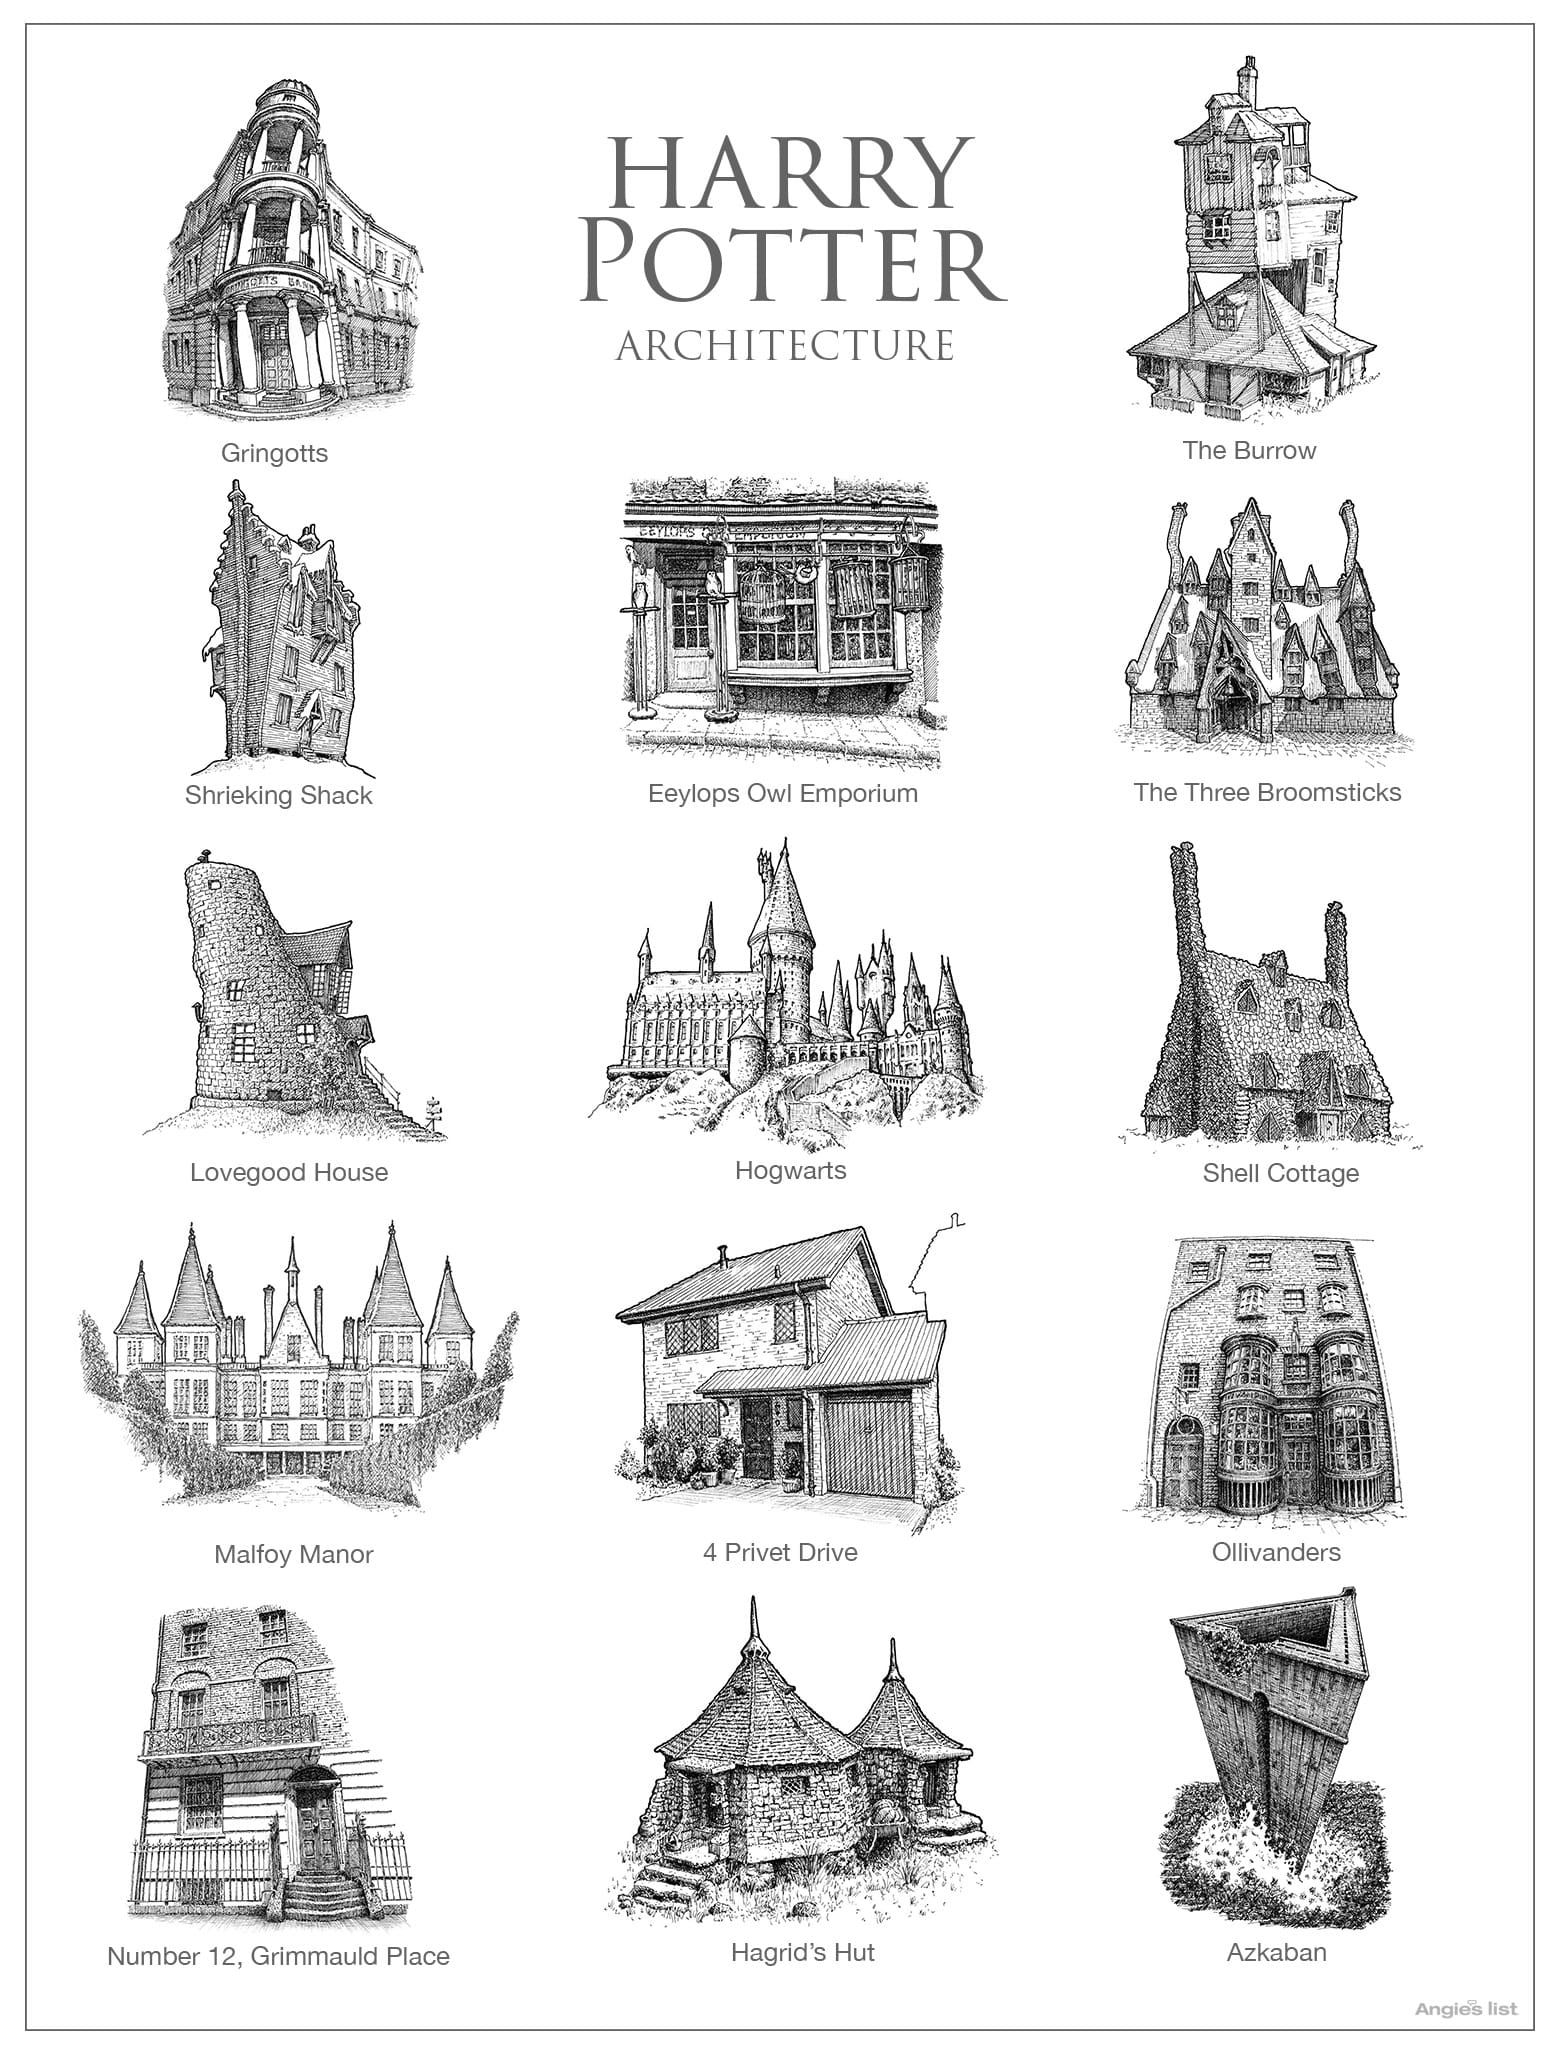 Hand-drawn architecture for Harry Potter